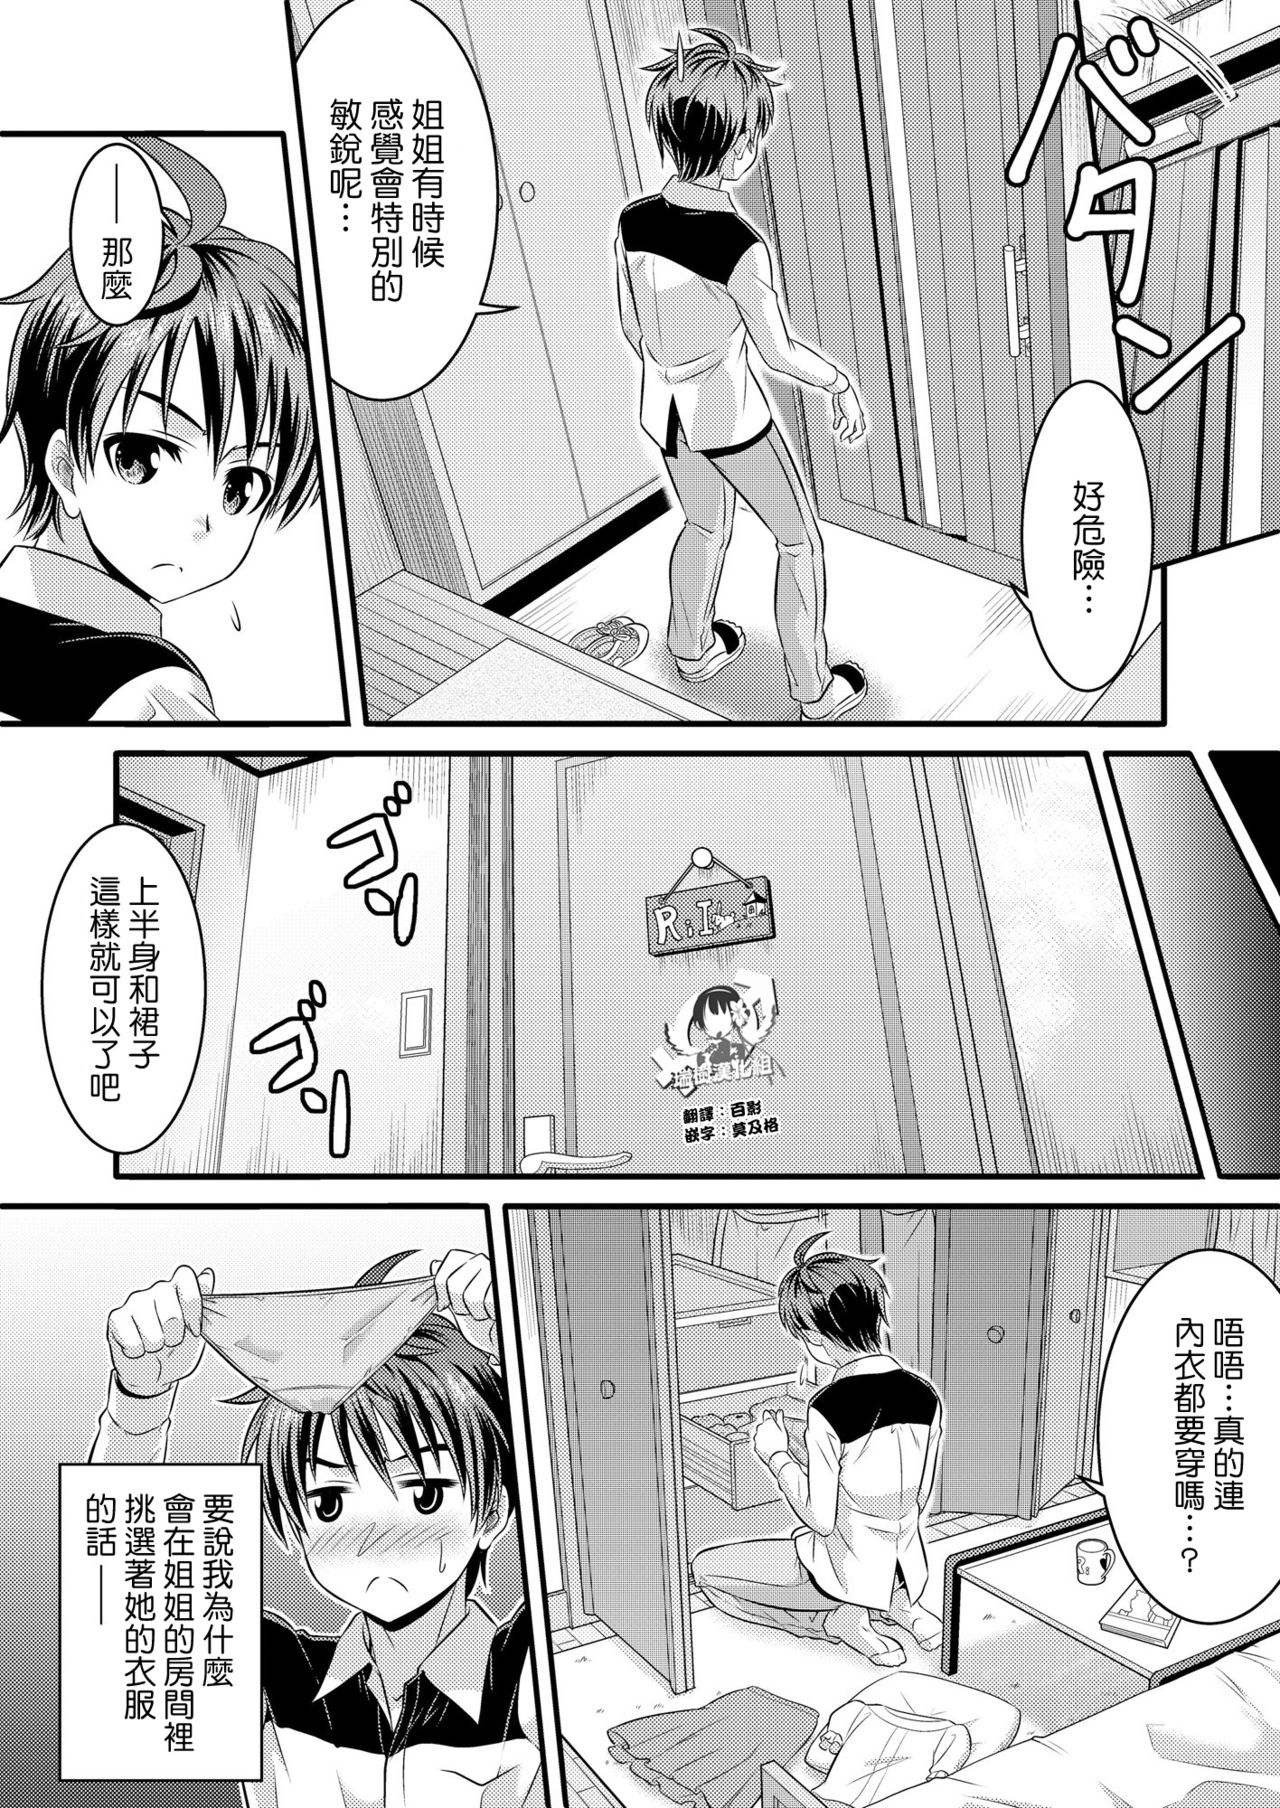 Metamorph ★ Coordination - I Become Whatever Girl I Crossdress As~ [Sister Arc, Classmate Arc] [Chinese] [瑞树汉化组] page 3 full